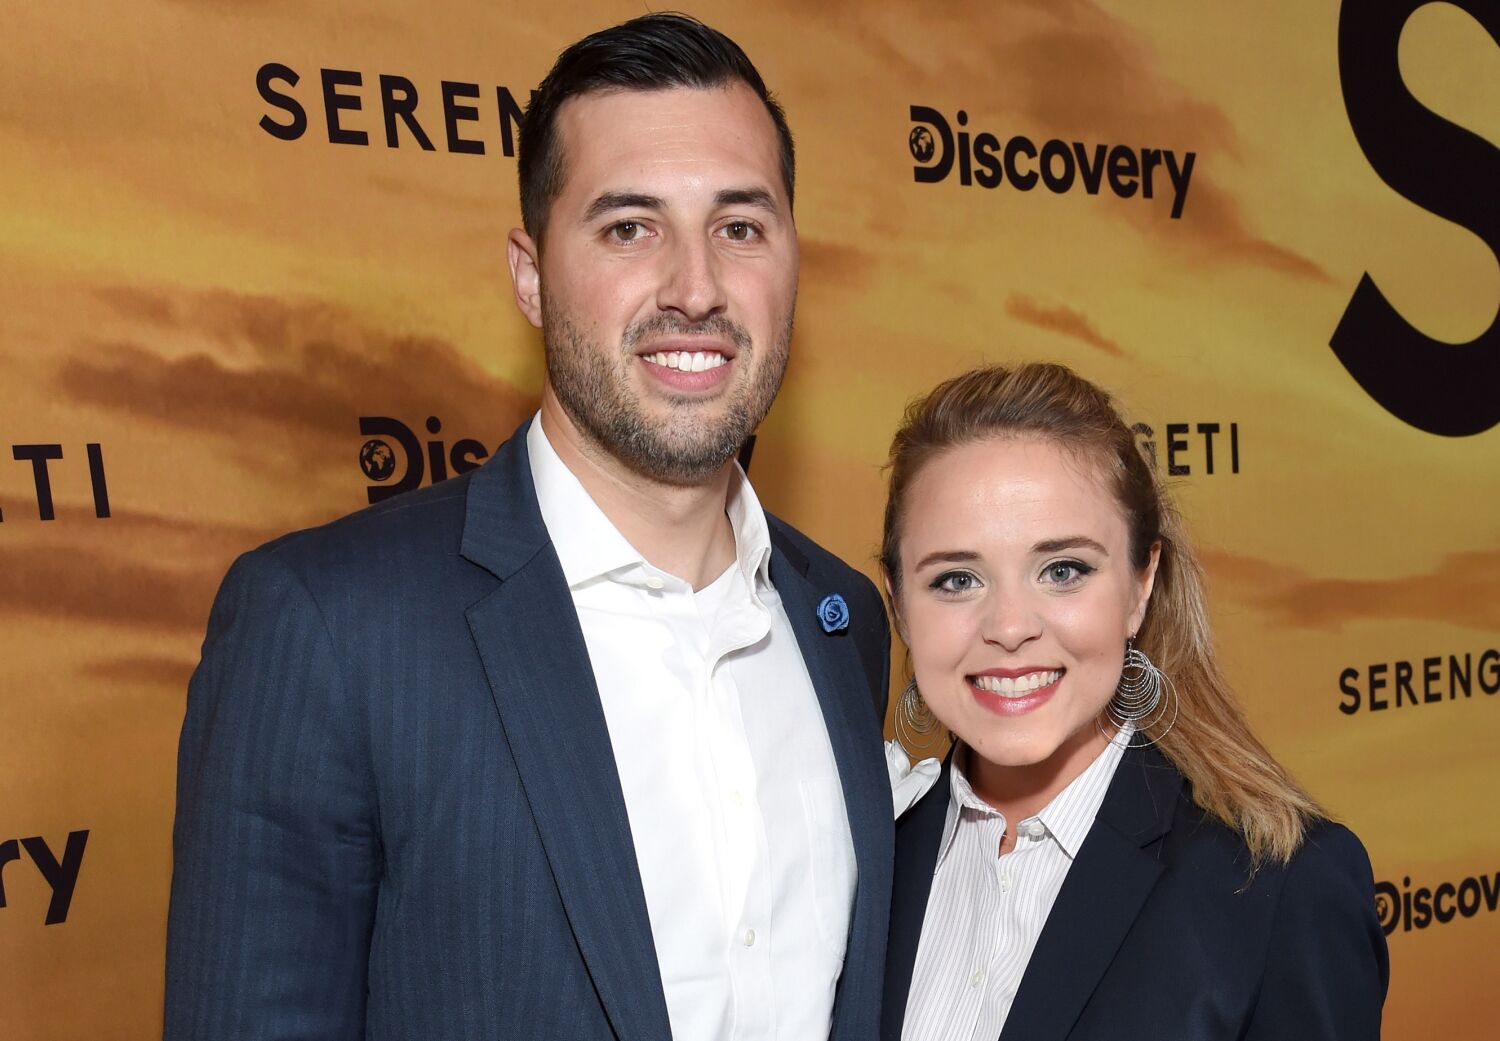 Jinger Duggar says family's 'cult-like' beliefs had her 'terrified of the outside world'